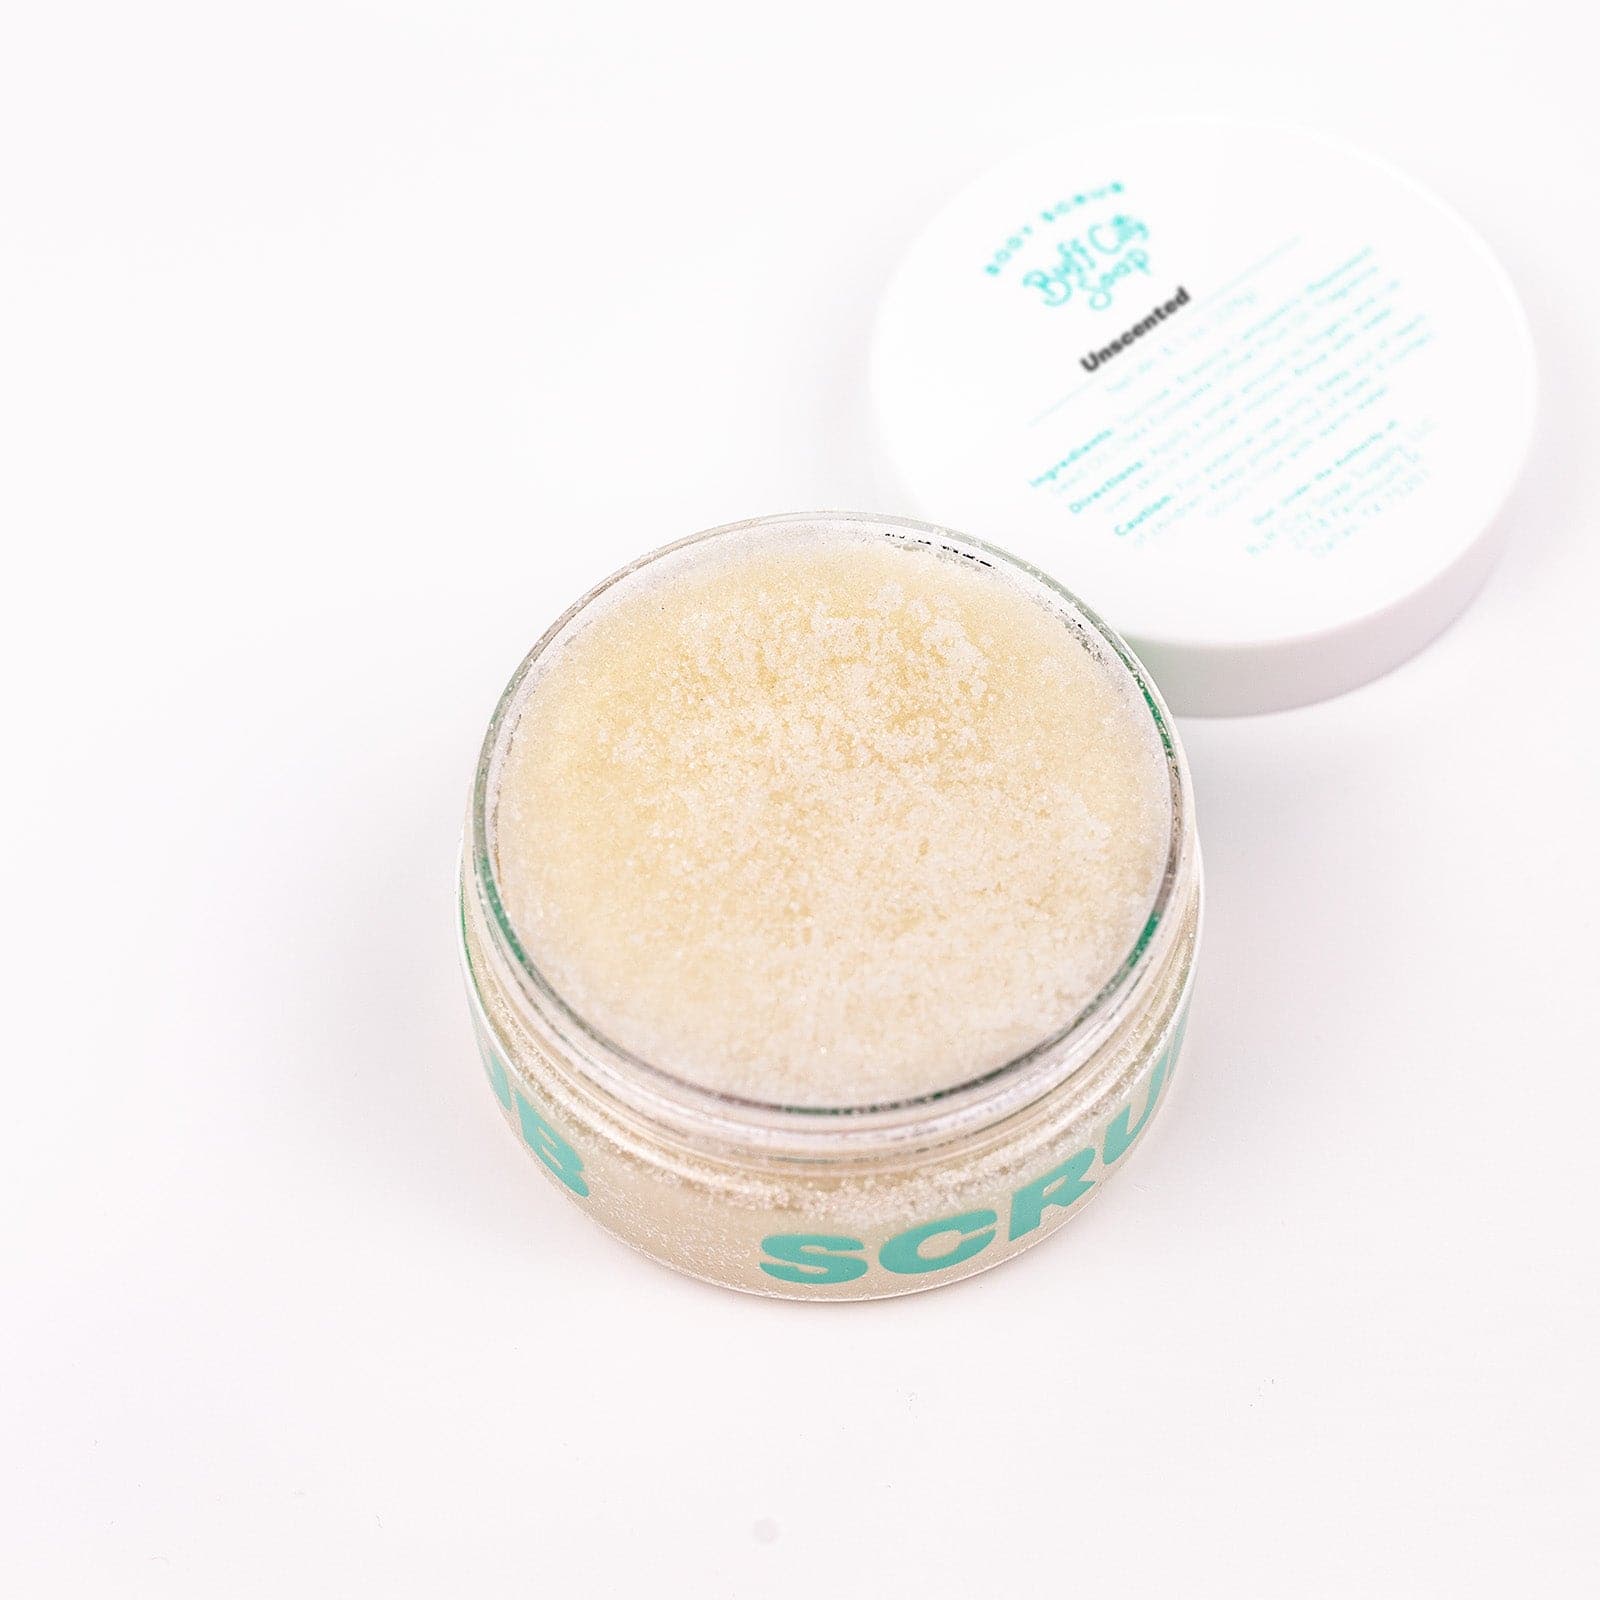 Open jar of Unscented Body Scrub with lid placed next to it